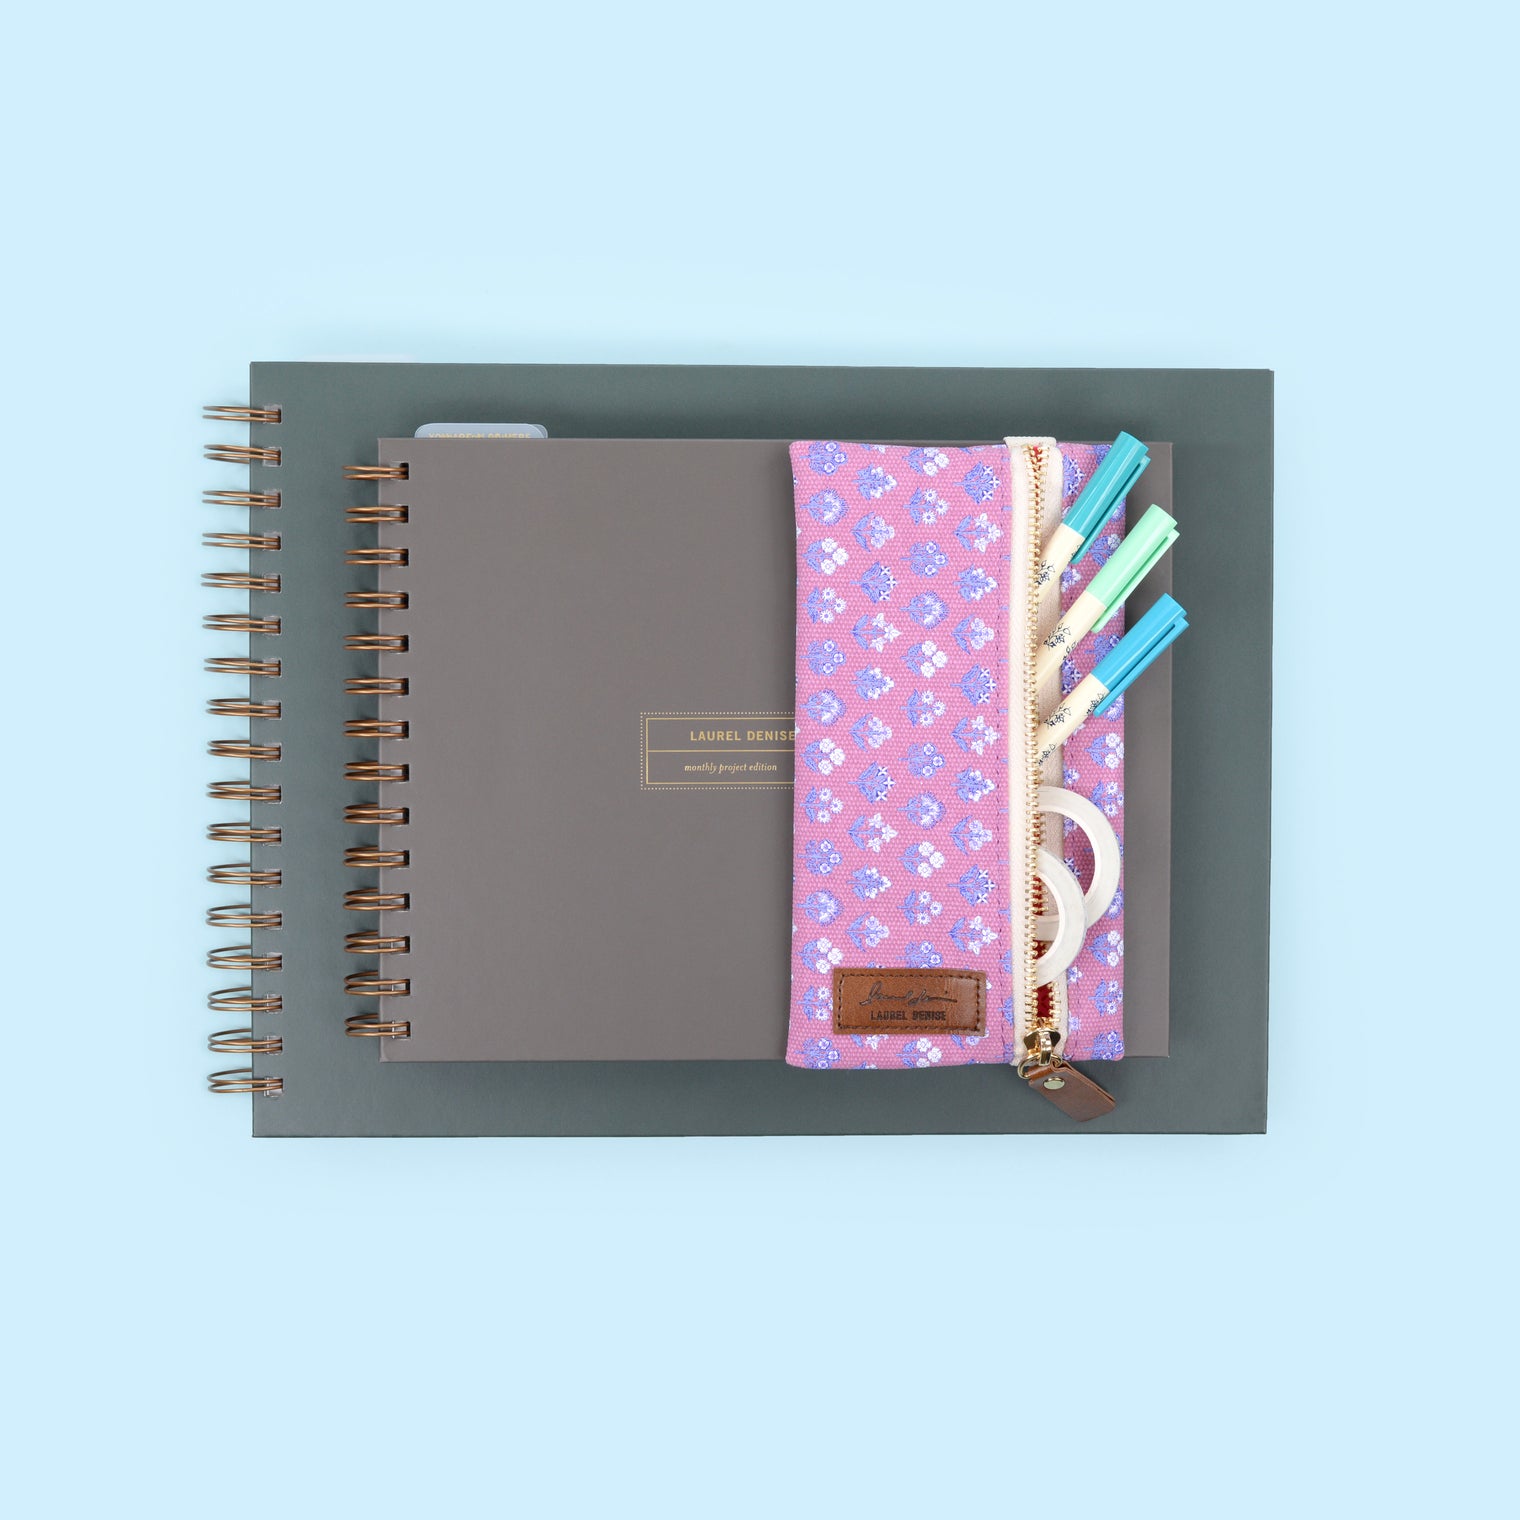 WITH ACCESSORIES ON MINI PLANNER